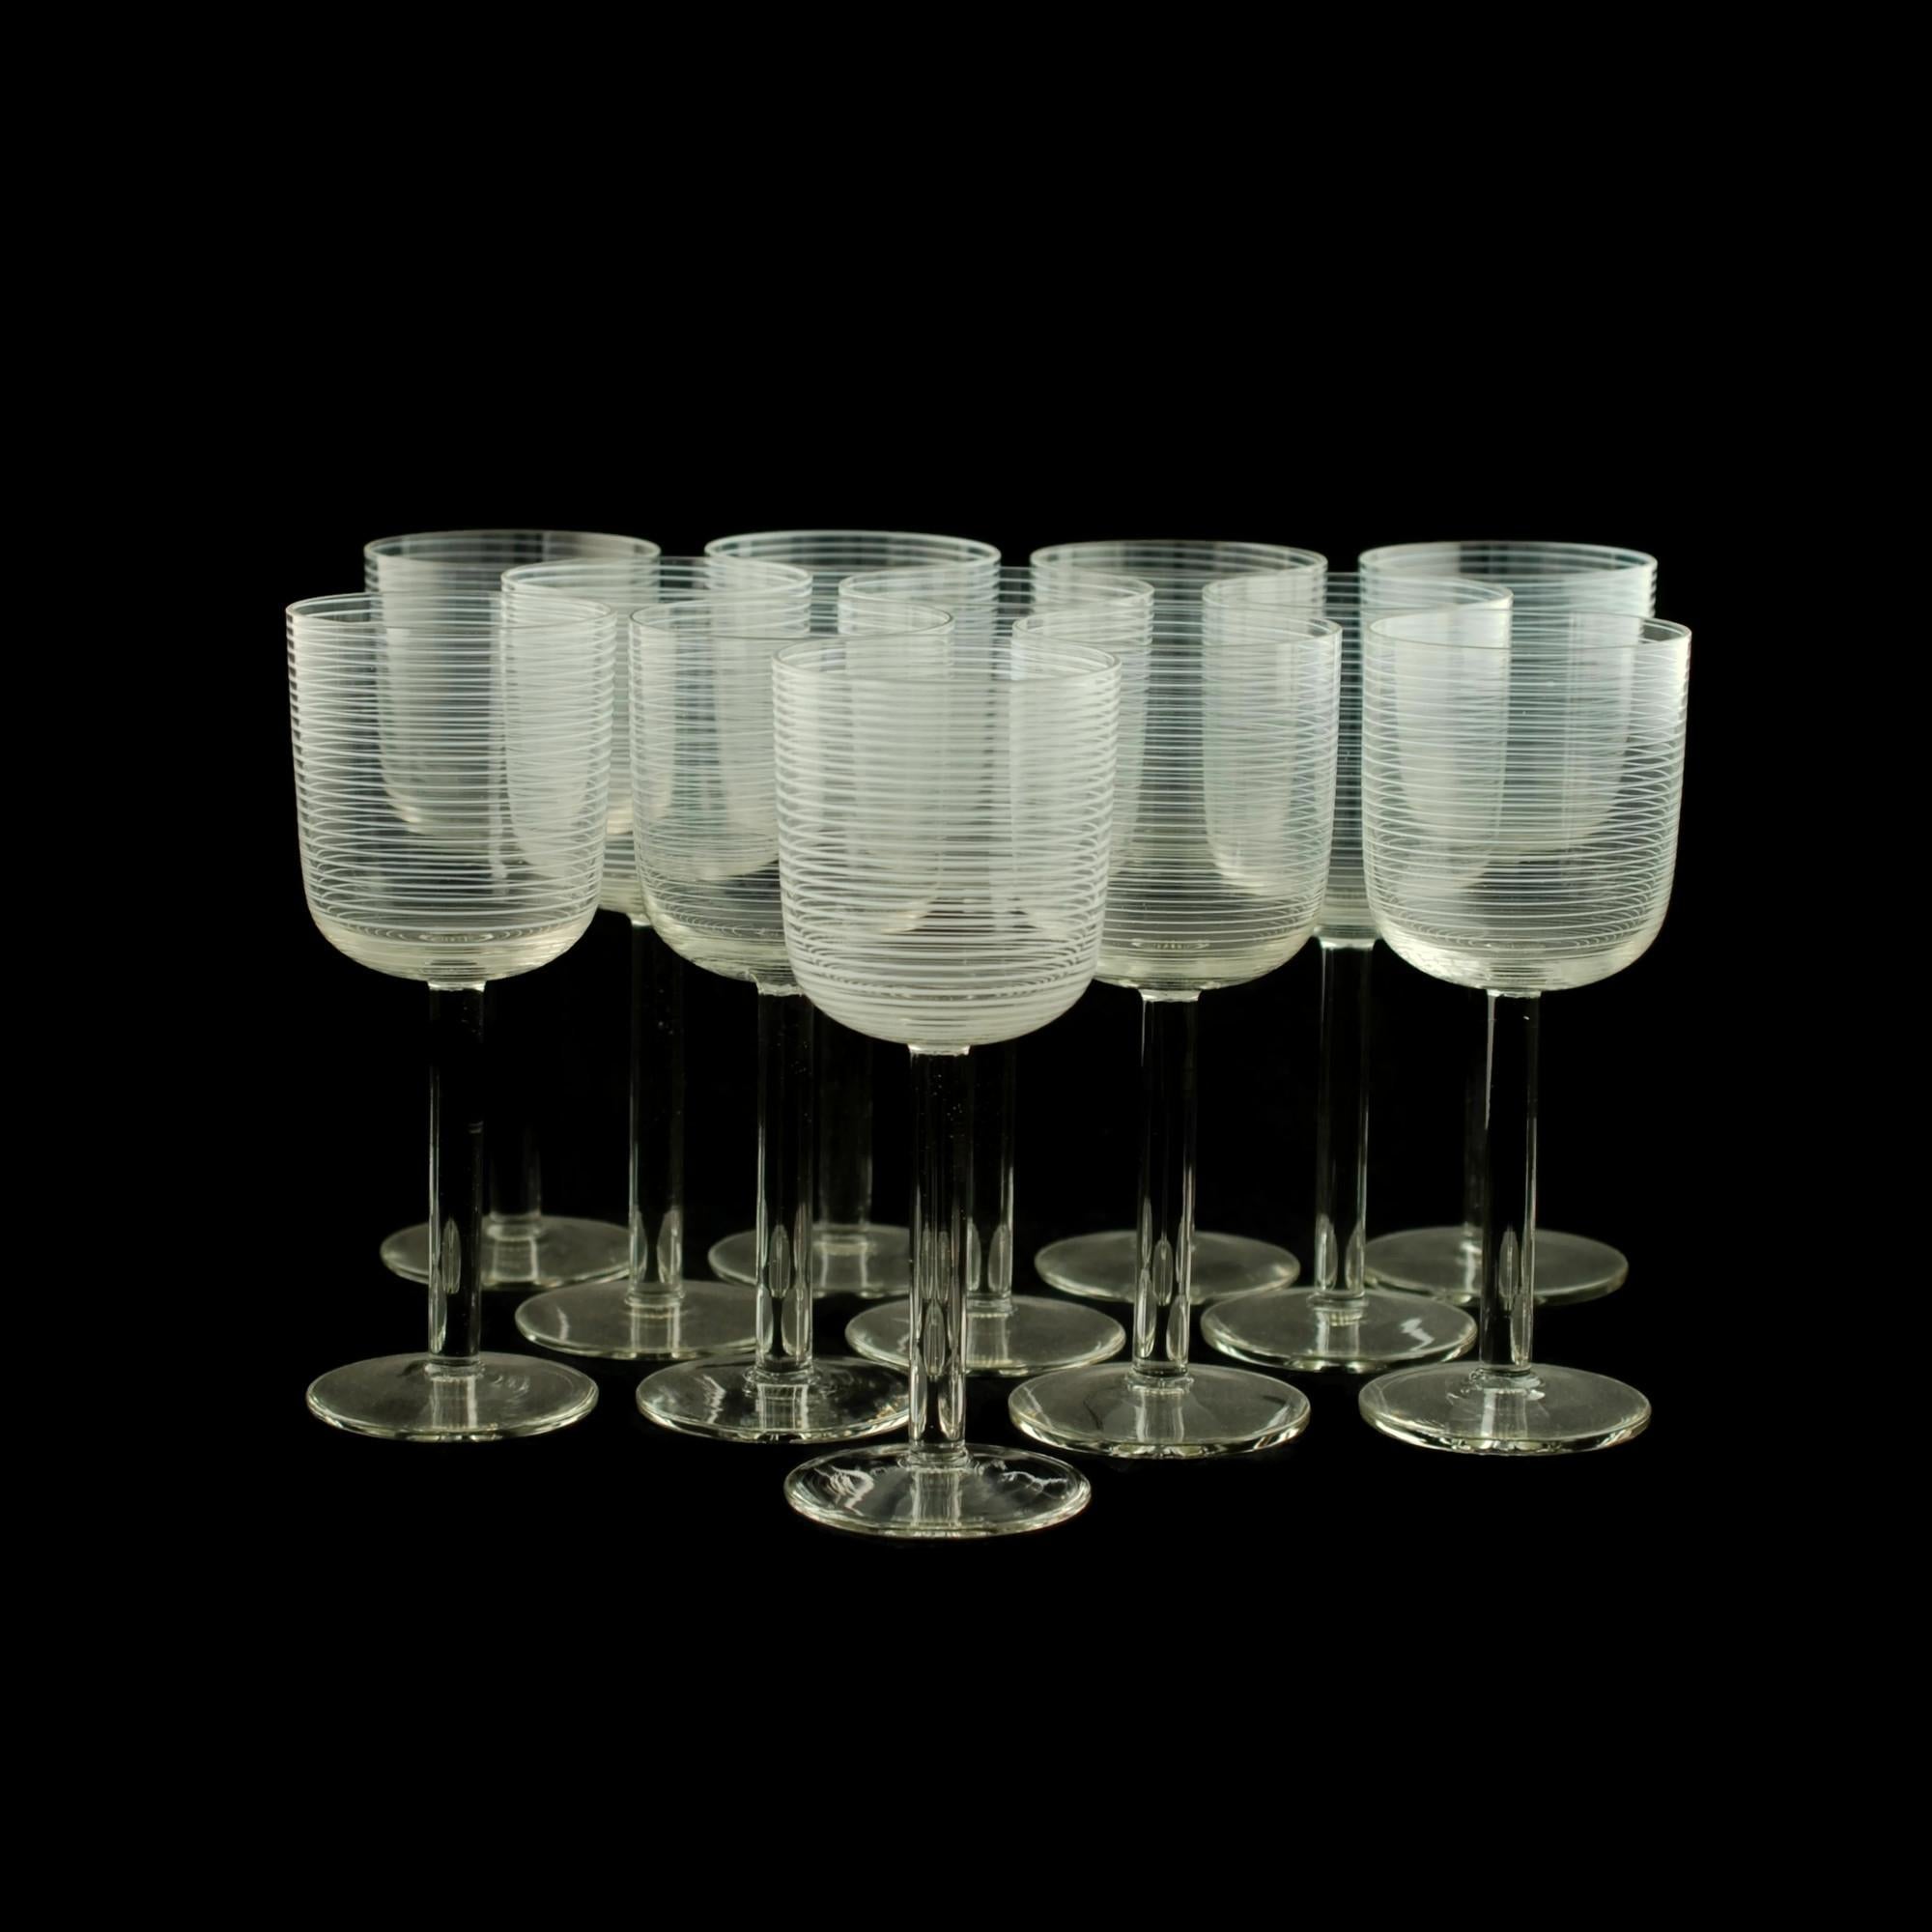 This elegant set of 12 handblown clear crystal goblets feature bowls which have been decorated with opaque white glass threads. The threads extend from the bottom of the bowls and spiral around the exterior, forming a series of closely spaced